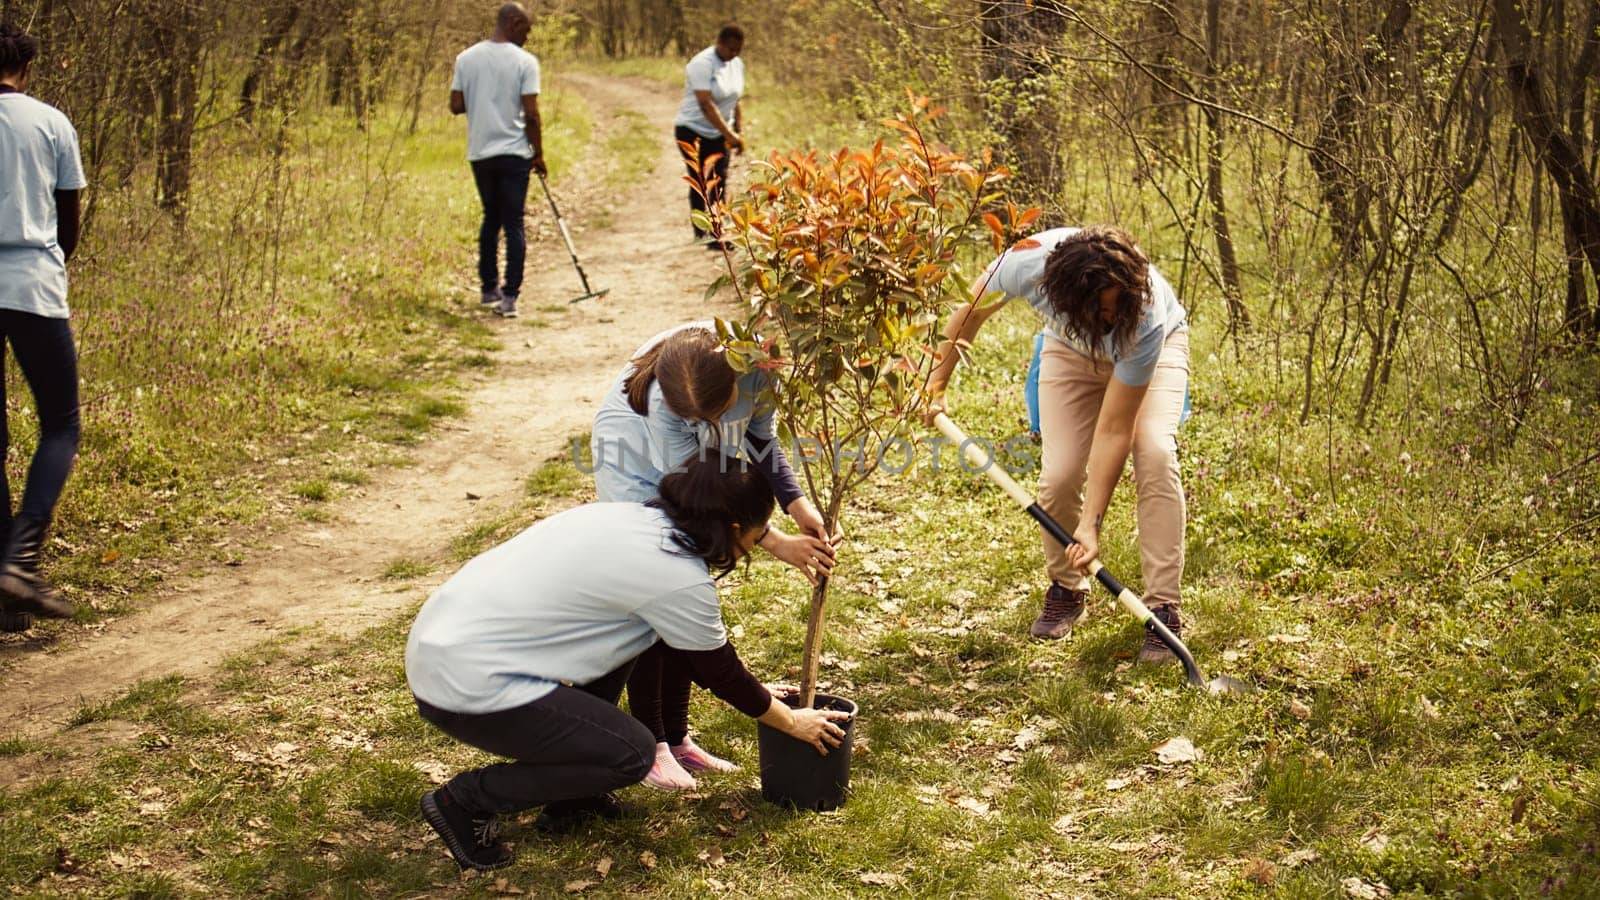 Climate activists planting new trees in a woodland ecosystem, digging holes and putting seedlings in the ground. Volunteers working on preserving nature and protecting the environment. Camera B.